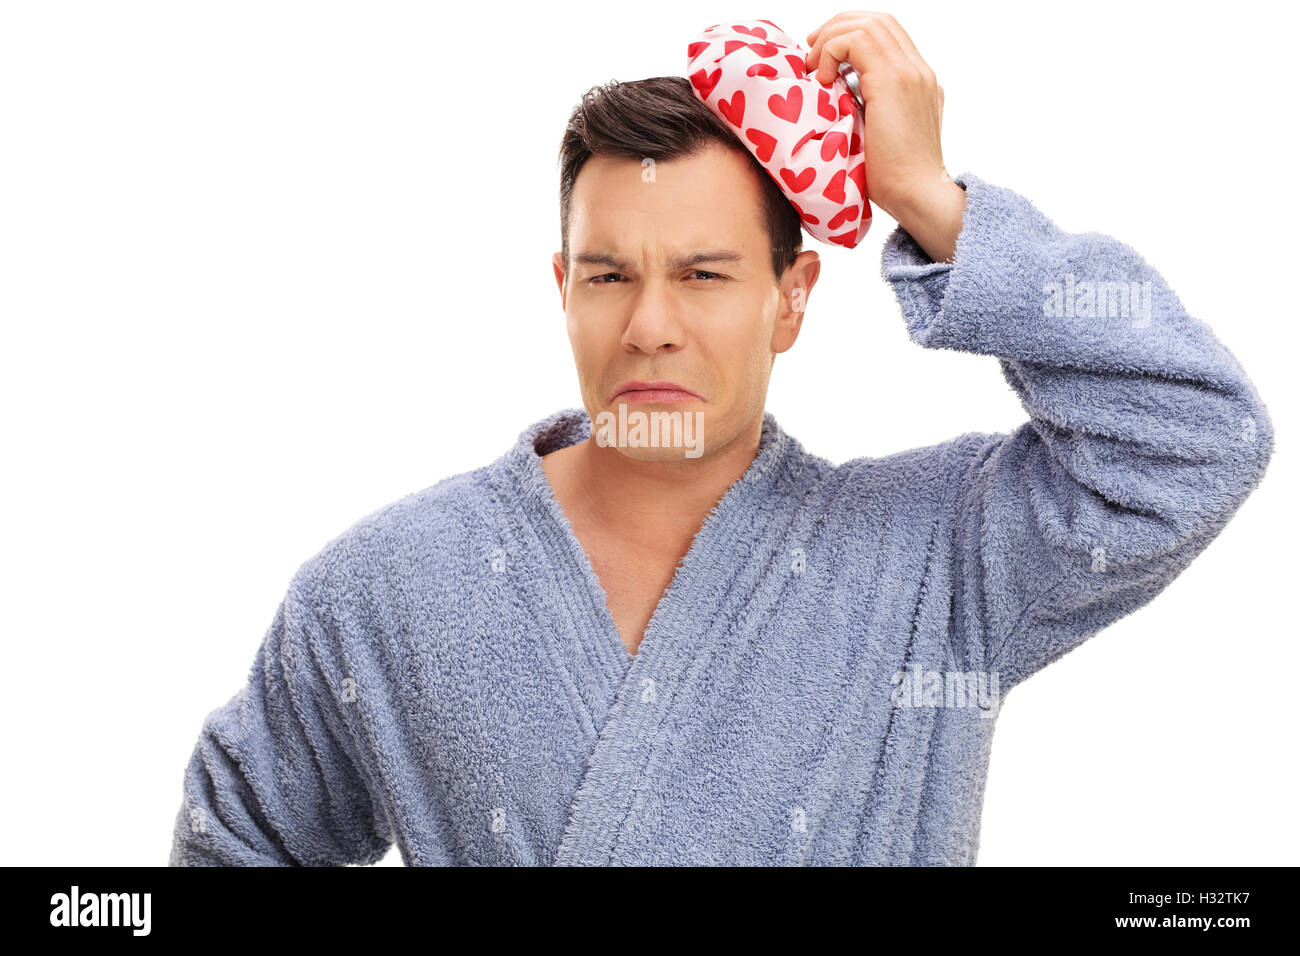 Young man in a bathrobe having a headache and holding an ice pack isolated on white background Stock Photo